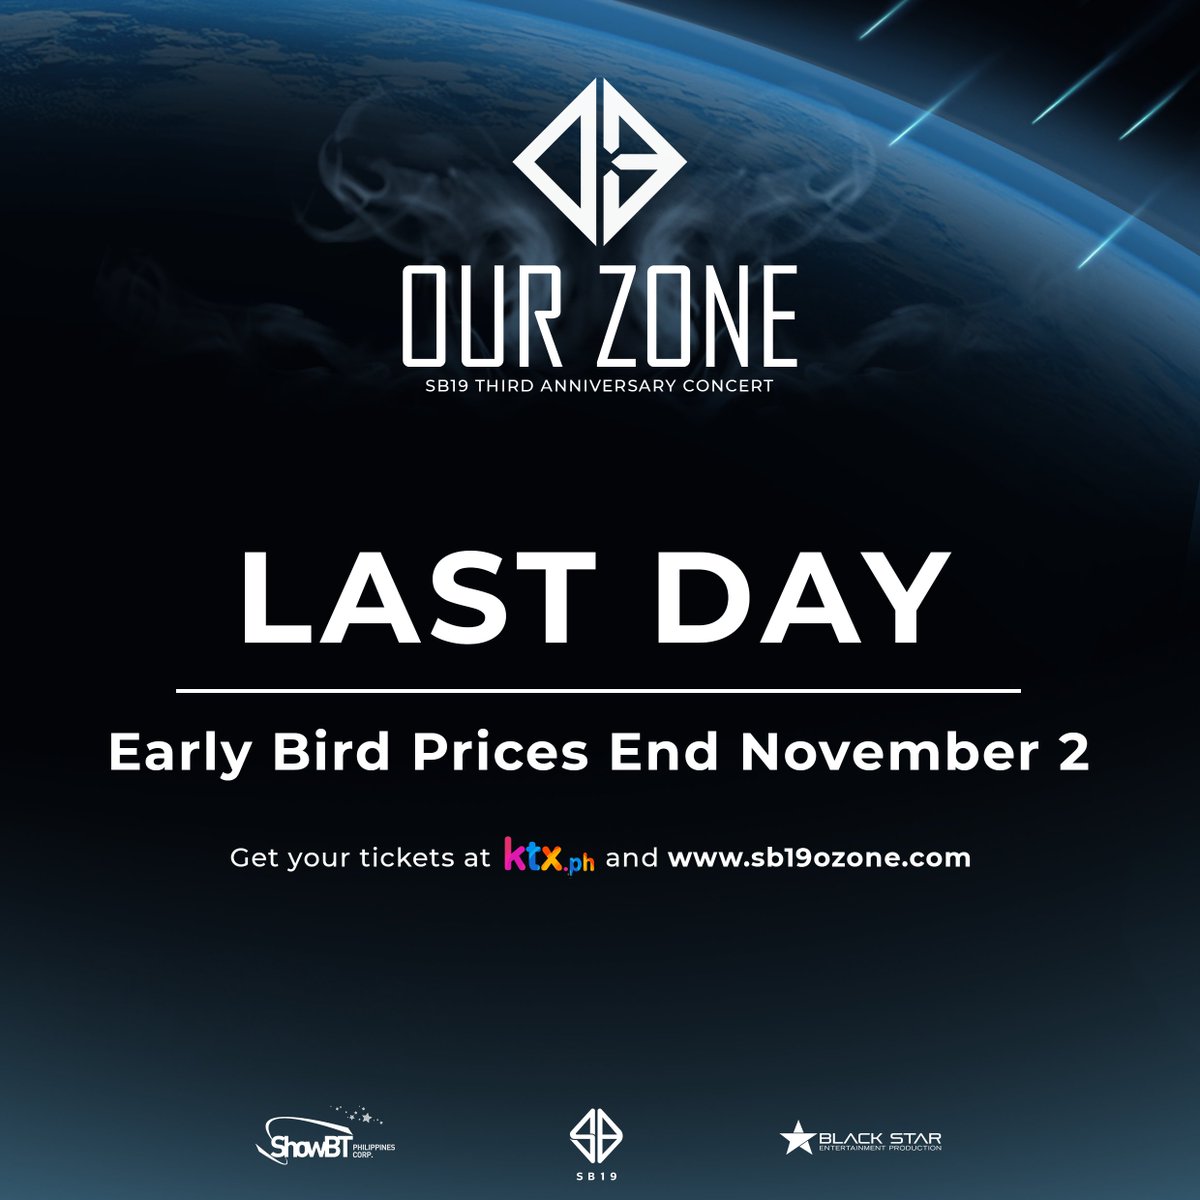 [NOTICE] Today is the last day of early bird ticket selling for Our Zone: SB19's Third Anniversary Concert. 

🎟 Get your tickets now at ktx.ph and sb19music.com

#SB19Anniv3rsary #SB19OurZone